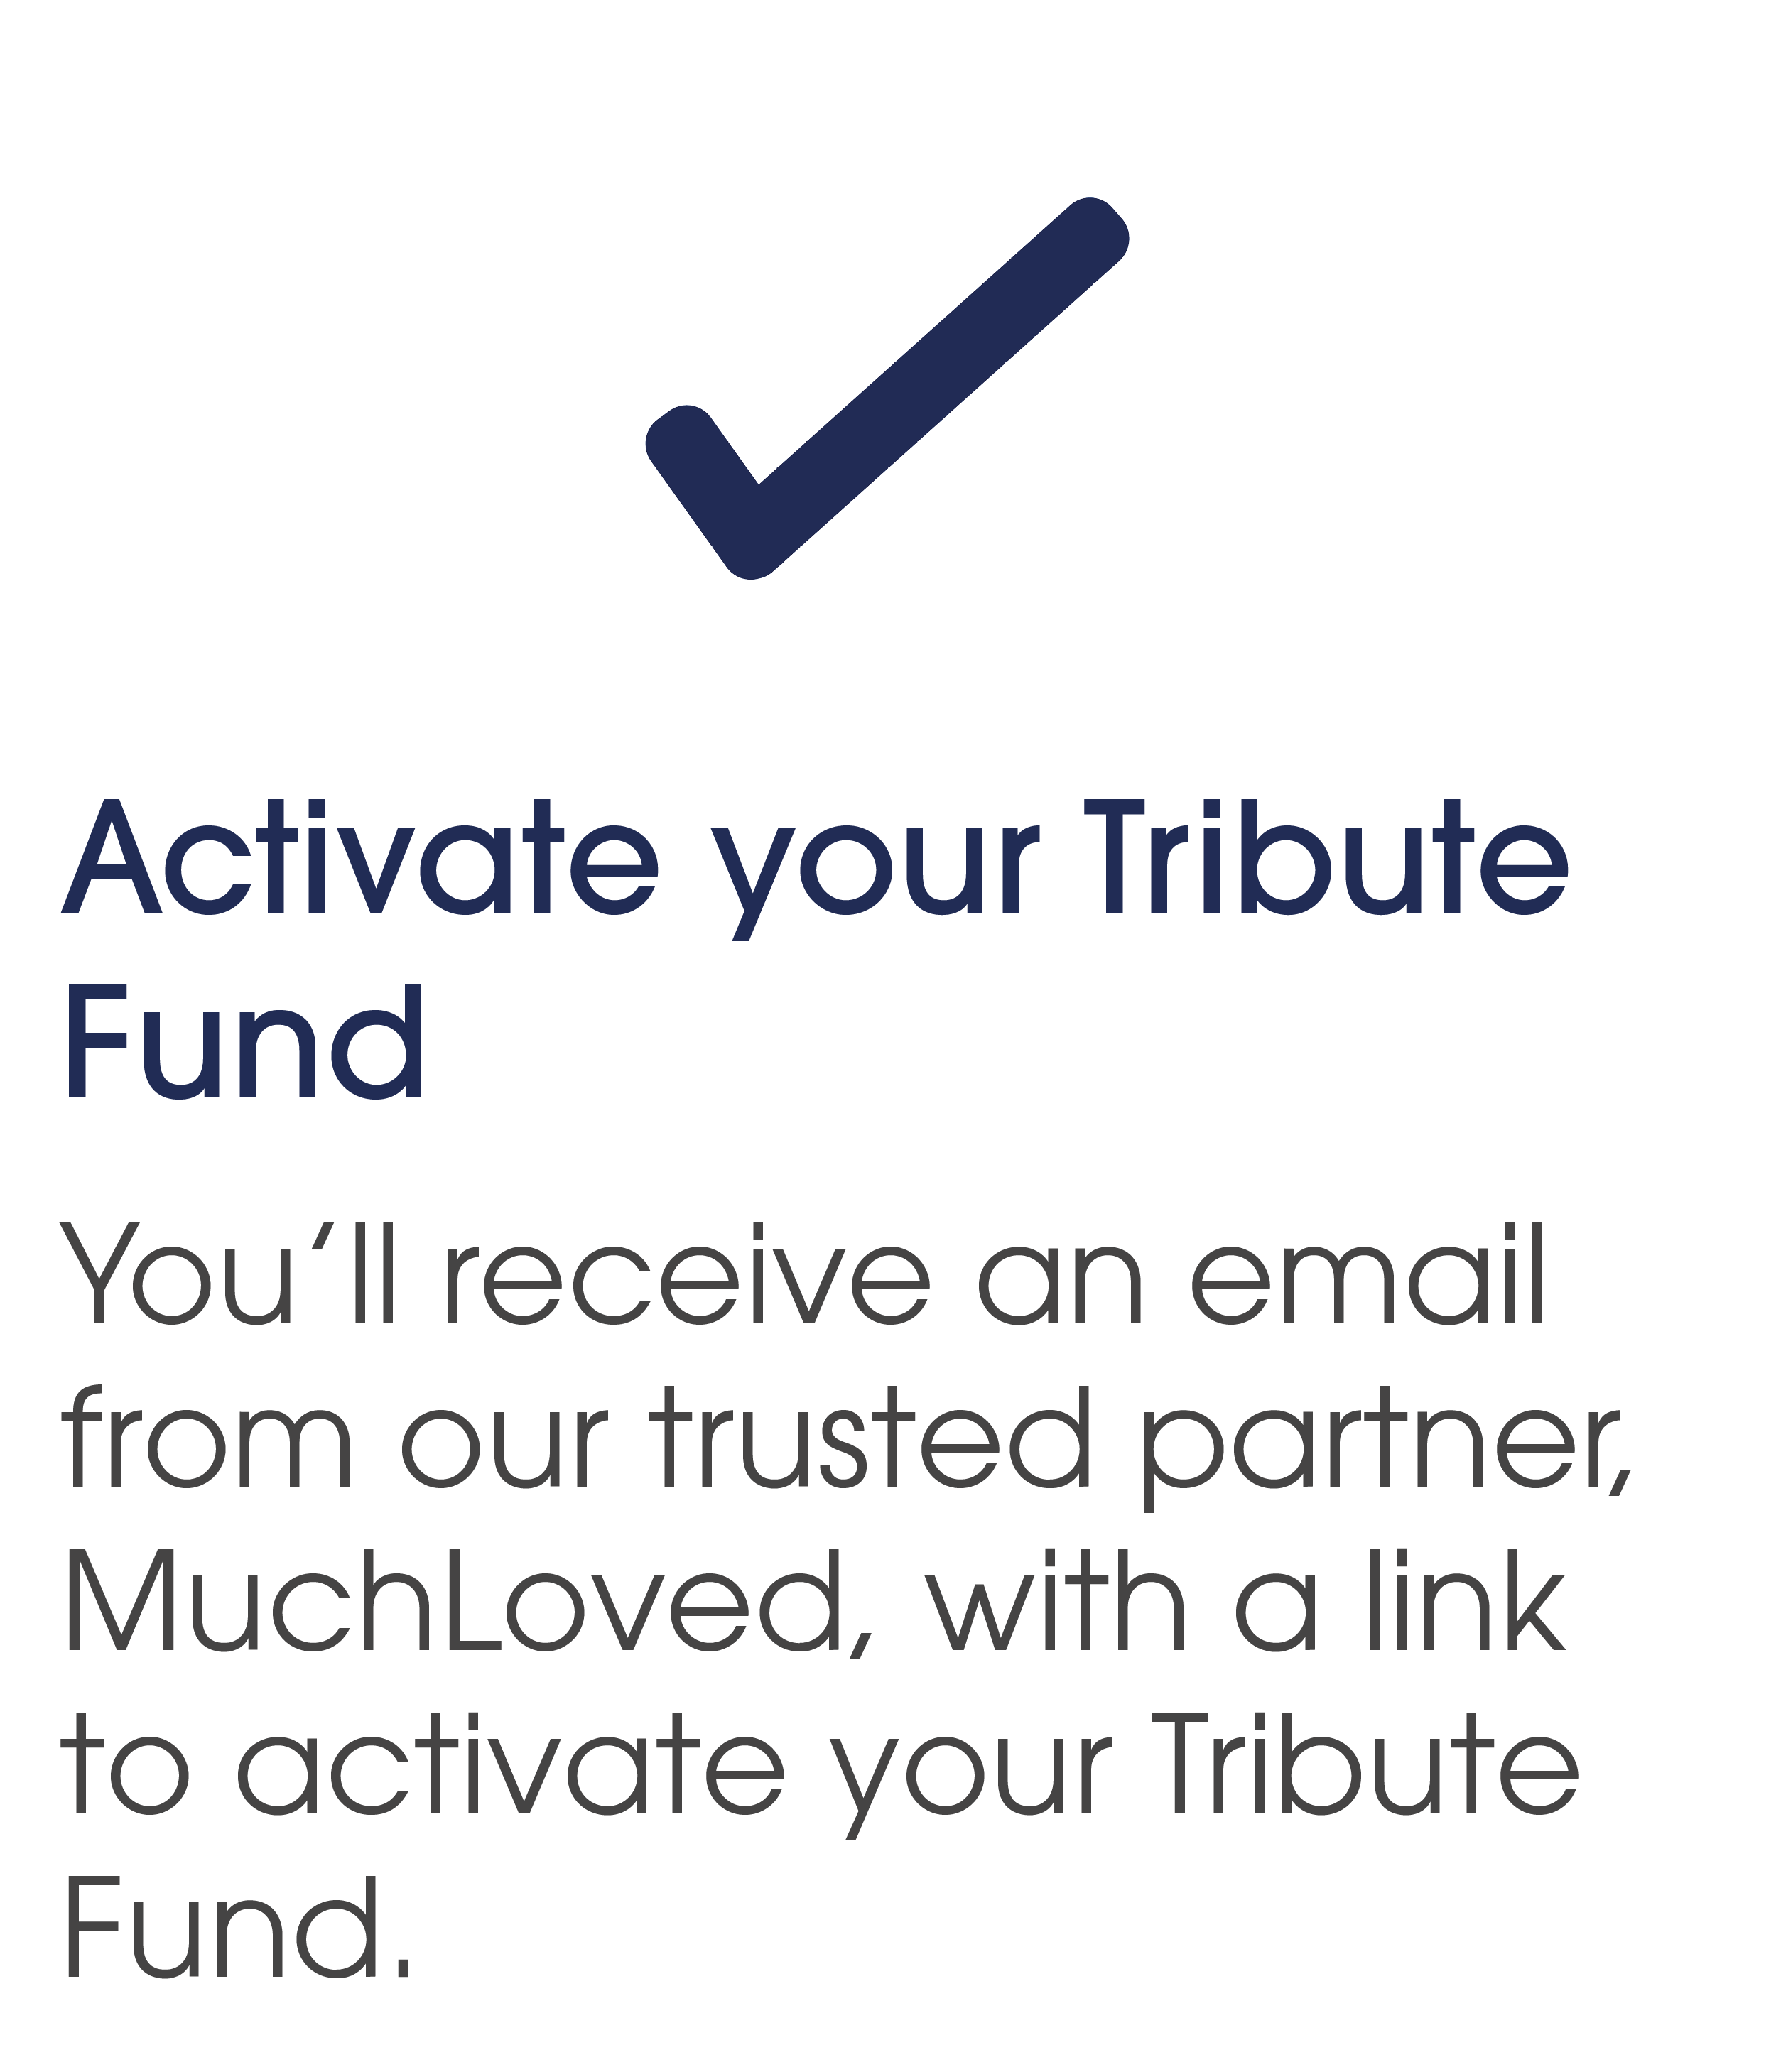 Activate your Tribute Fund. You will receive an email from our trusted partner, MuchLoved, with a link to activate your Tribute Fund.